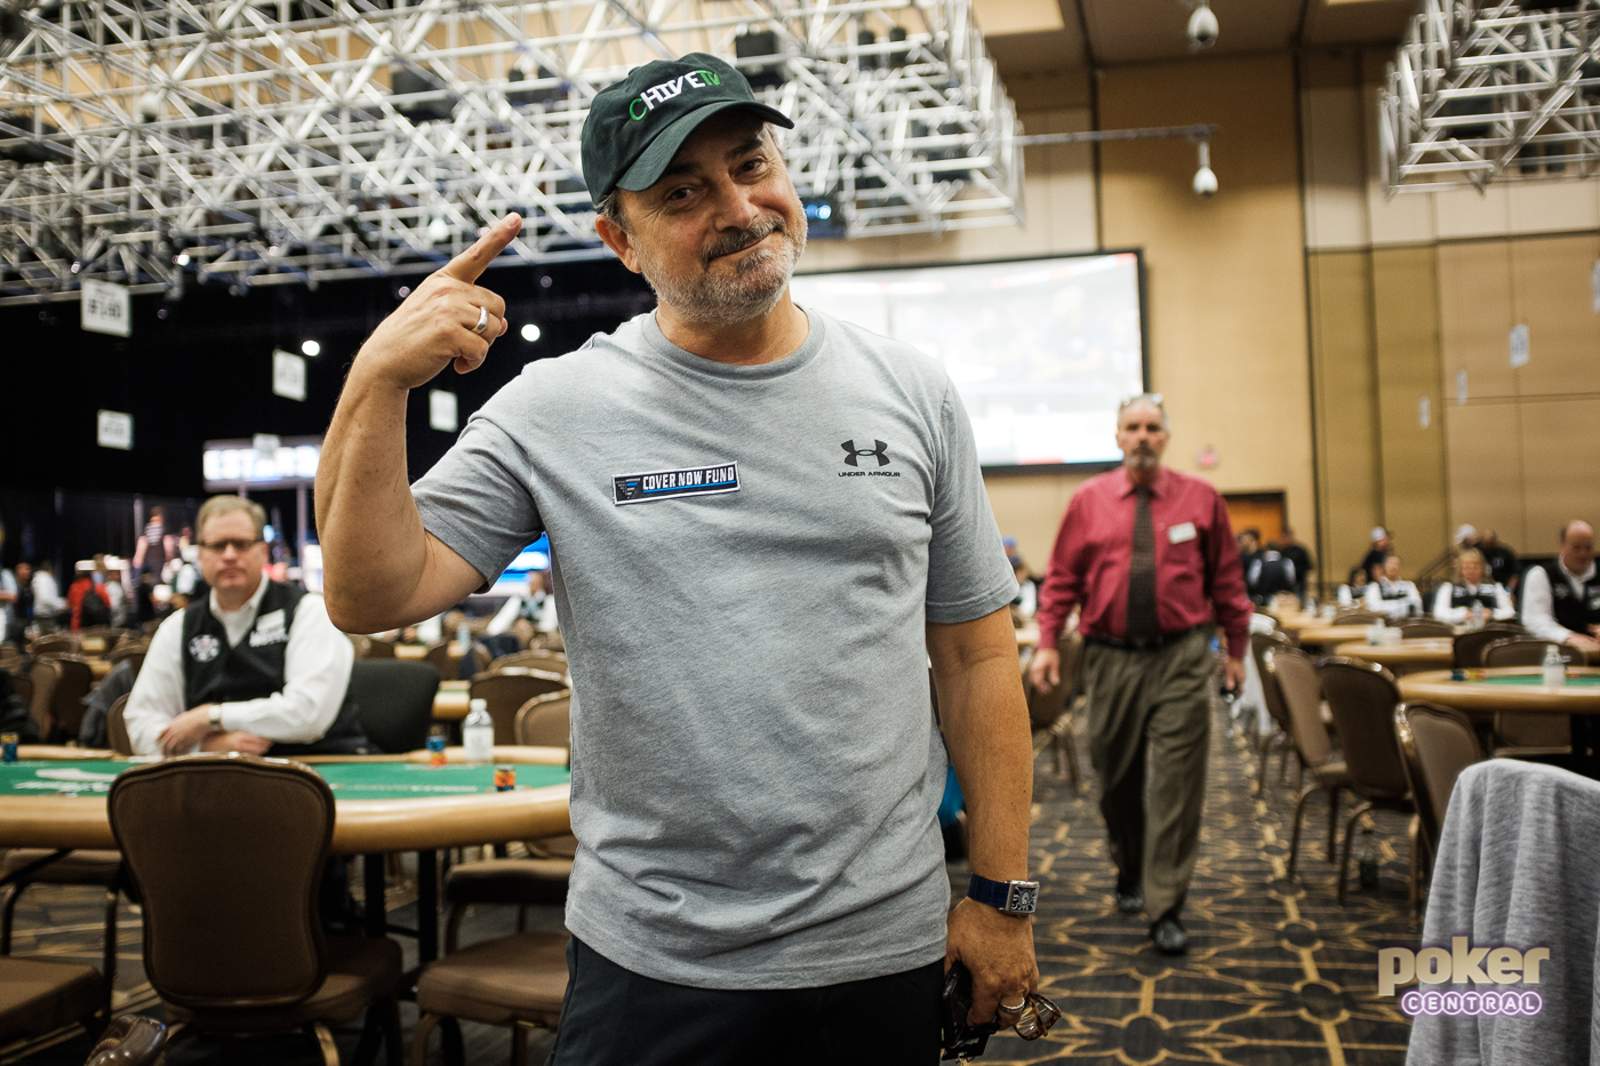 Kevin Pollak: "This is the Ultimate Poker Tournament."